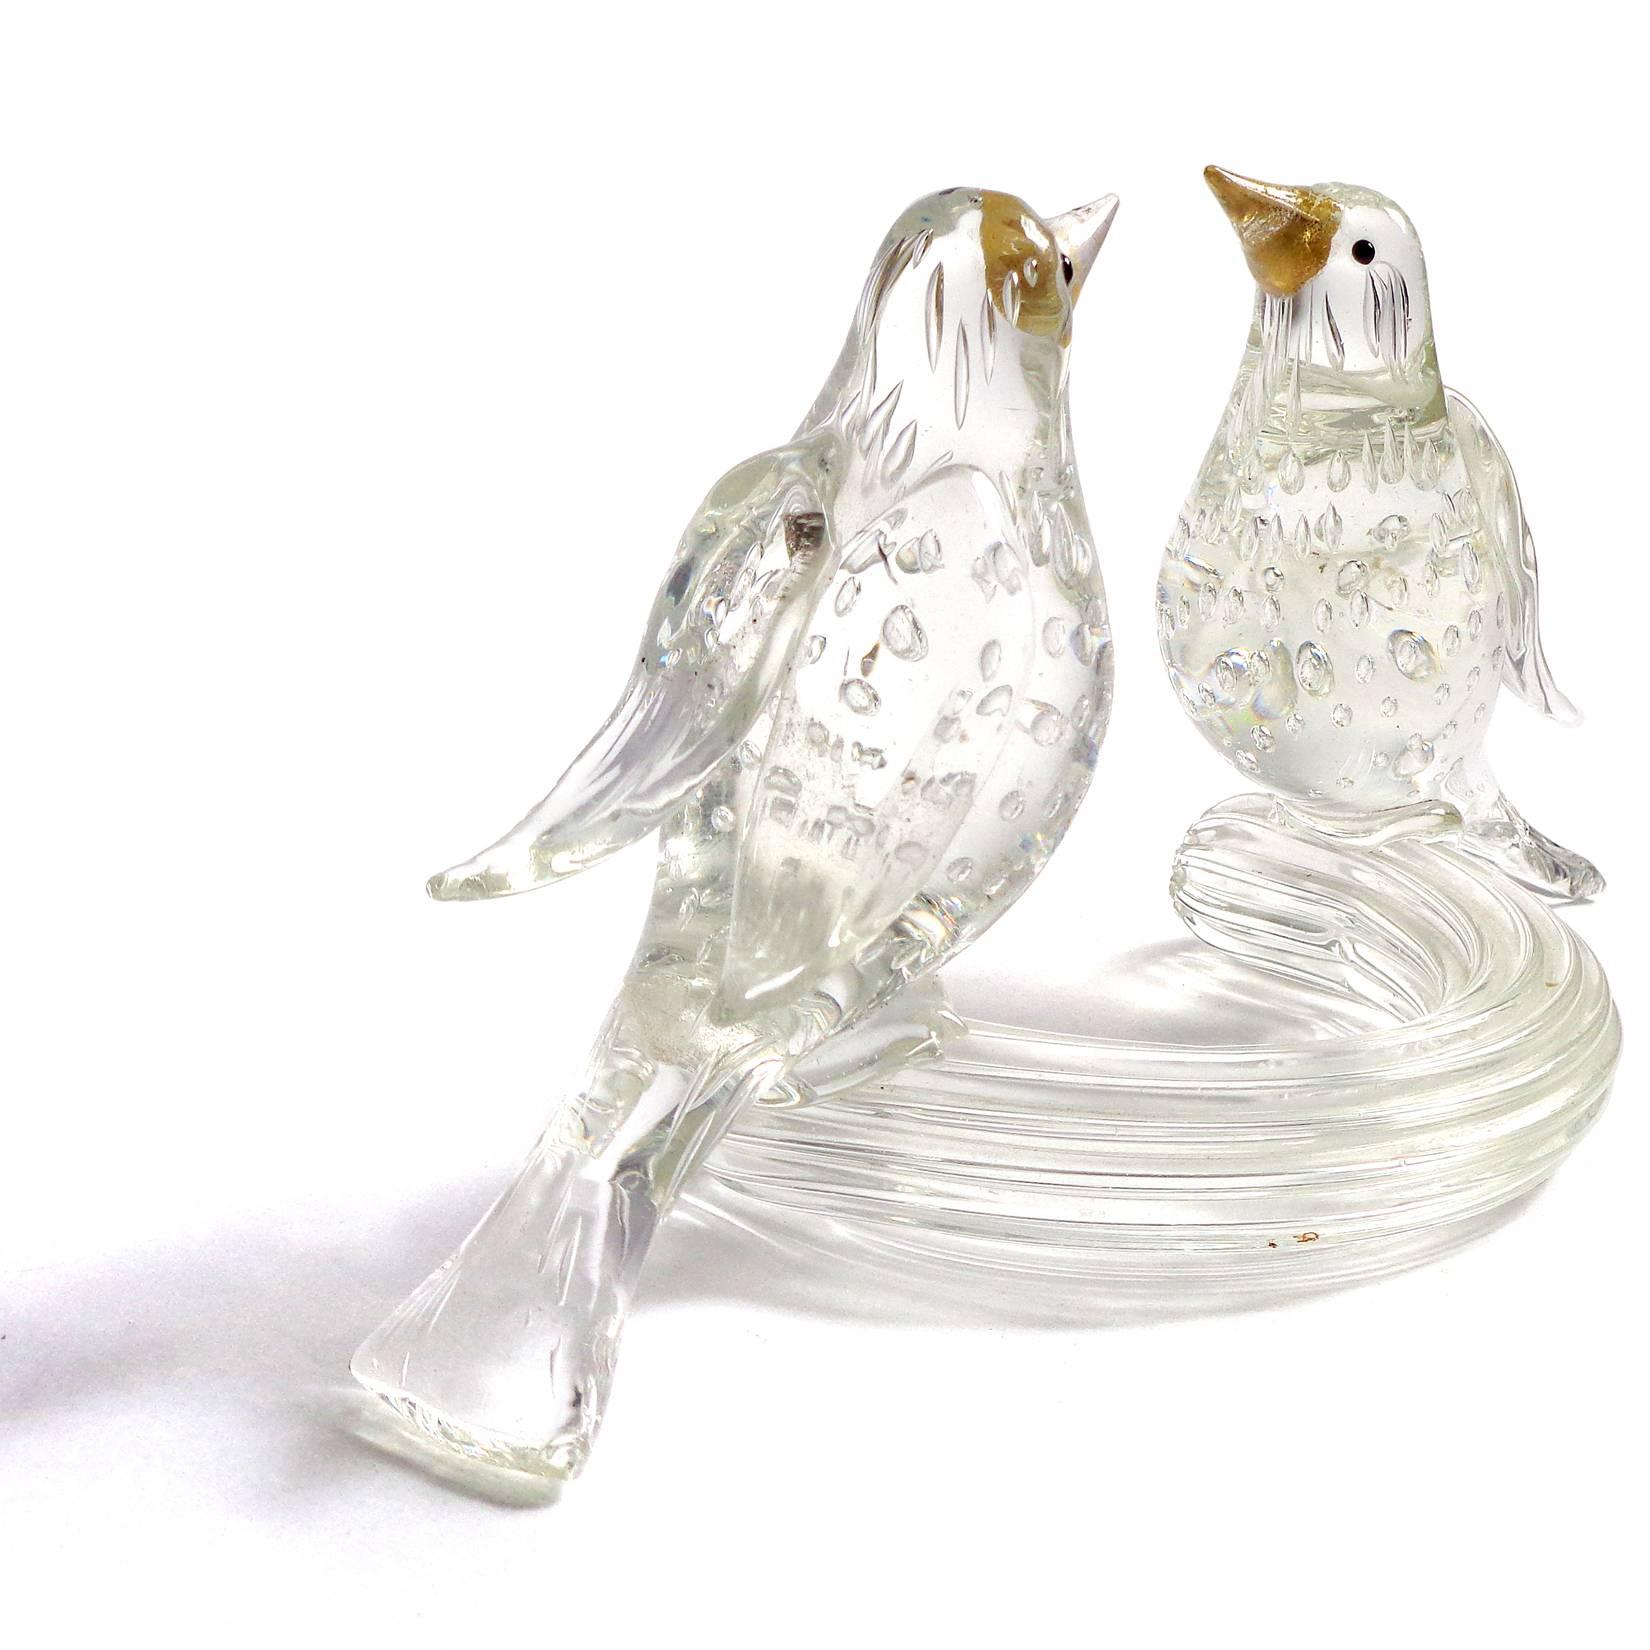 Free shipping worldwide! See details below description.

Beautiful Murano crystal clear, bubbles and gold flecks art glass birds sculpture. Attributed to the Barovier e Toso company. Sweet pair of finches sitting on a clear base, with gold leaf on